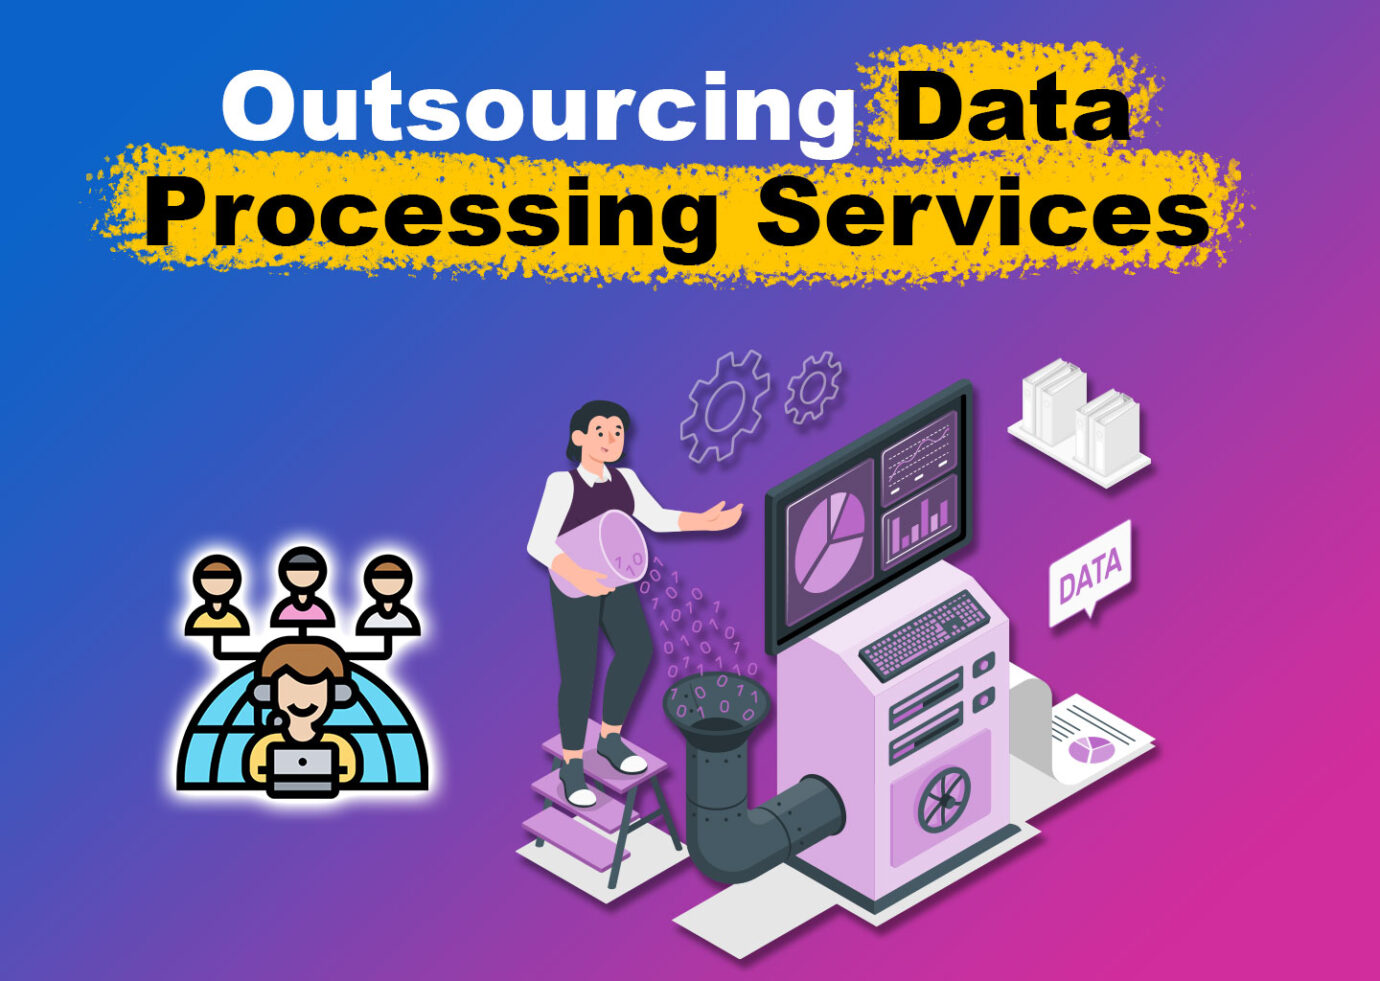 Outsourcing Data Processing Services